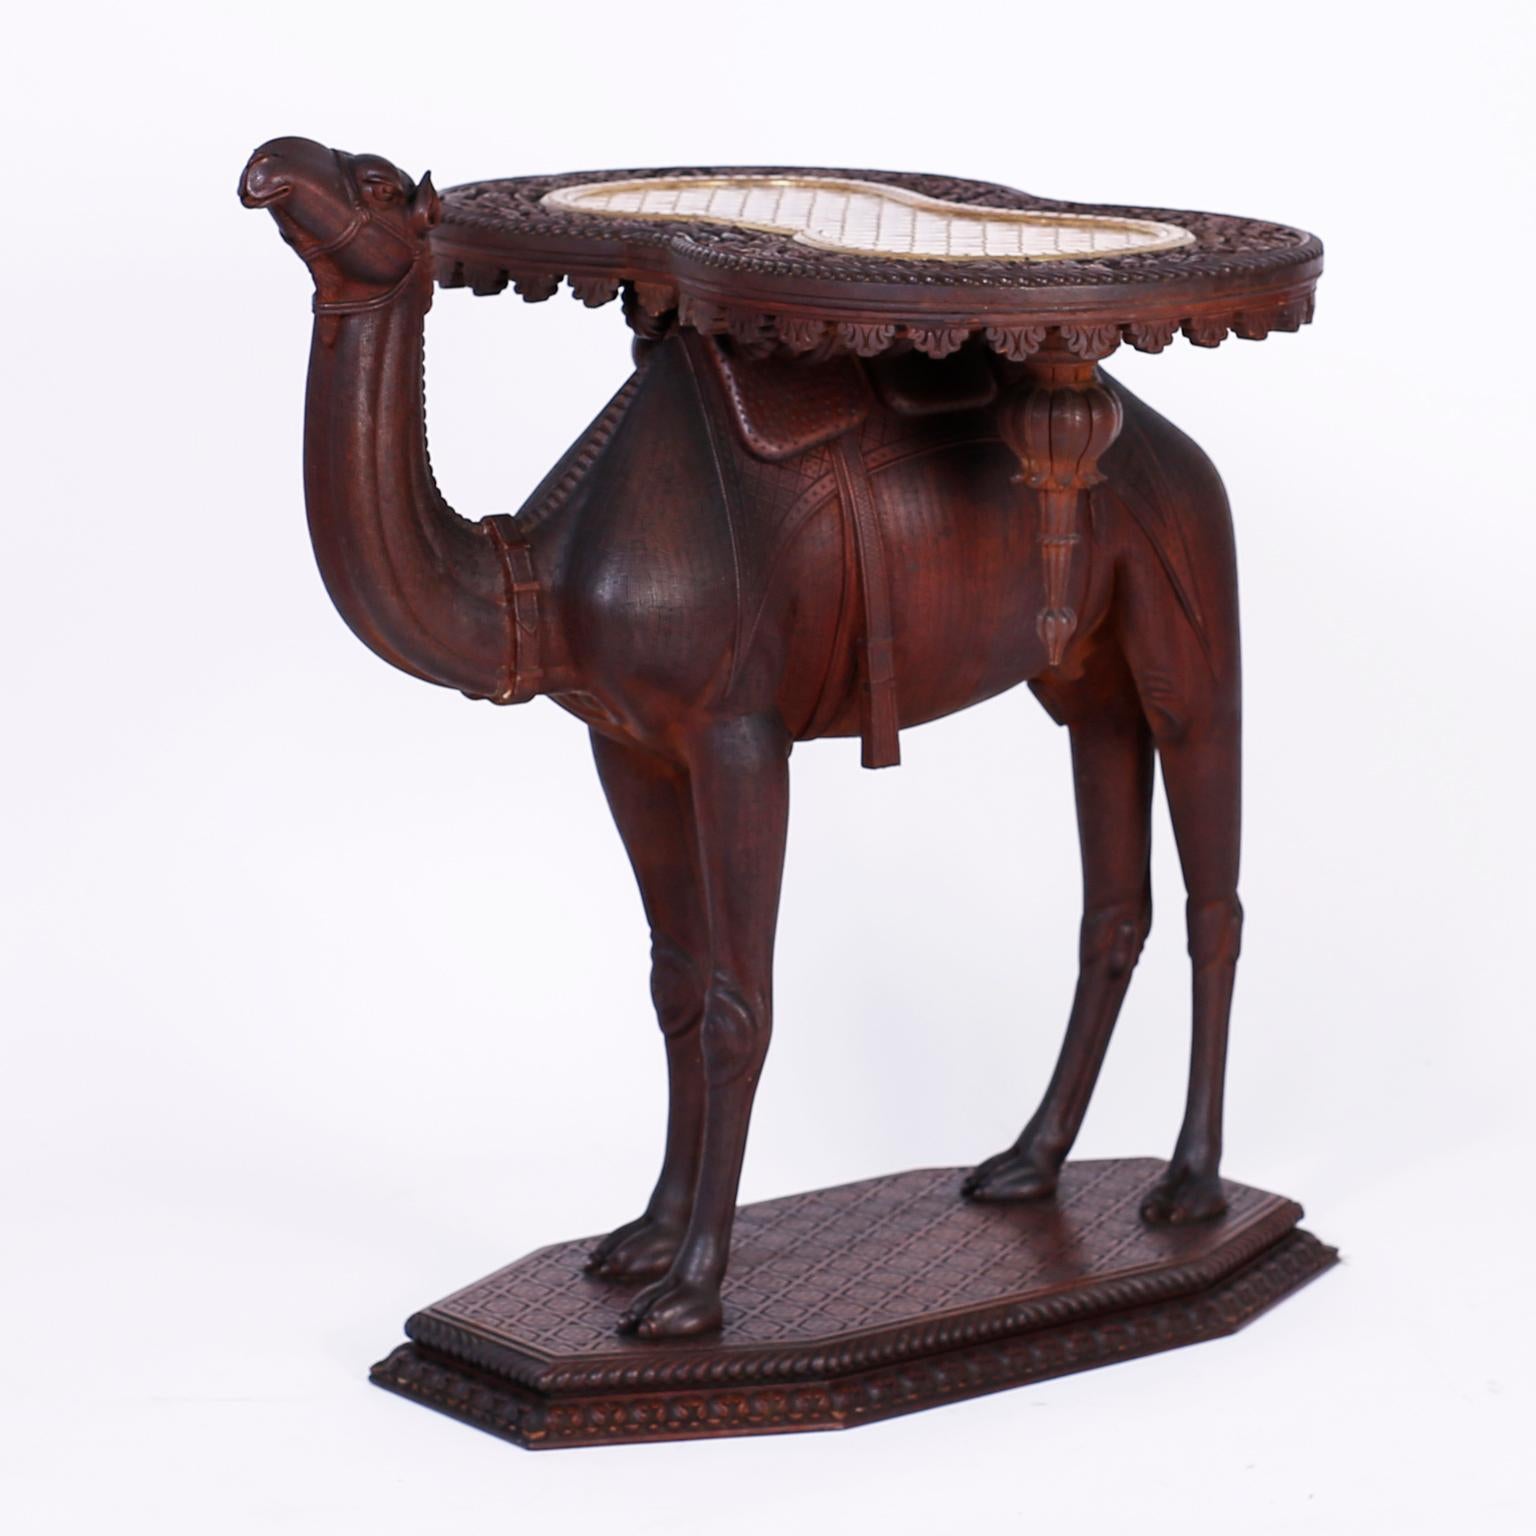 Antique Anglo-Indian British colonial occasional table or stand crafted in mahogany with an elaborately carved removable top highlighted with an inset hand hammered brass tray. The carved mahogany camel base has an enchanting familiar expression and